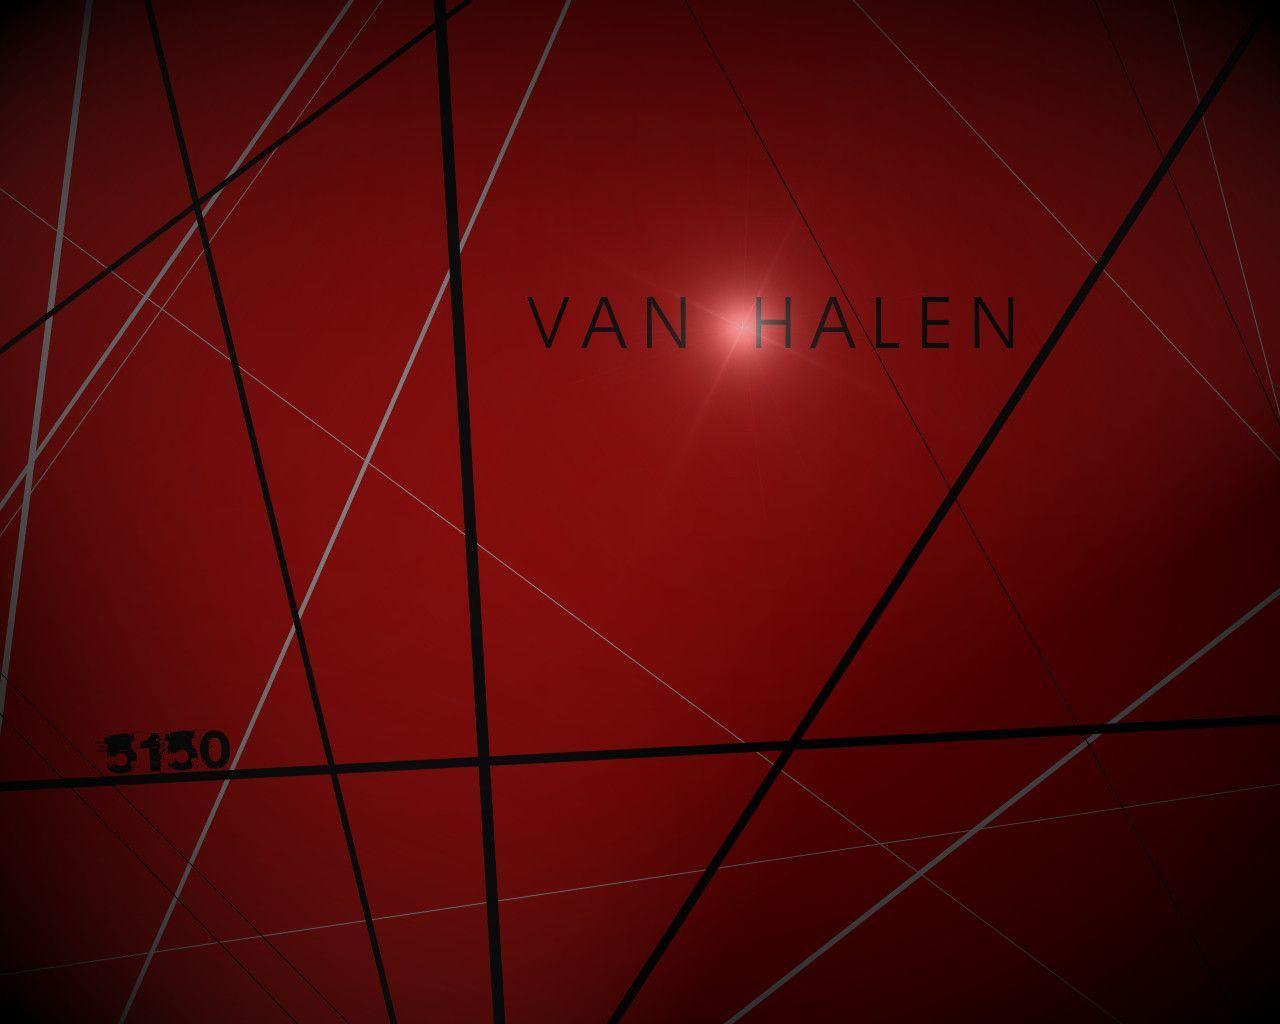 View topic Wallpaper!!??? - Halen.com - Welcome to